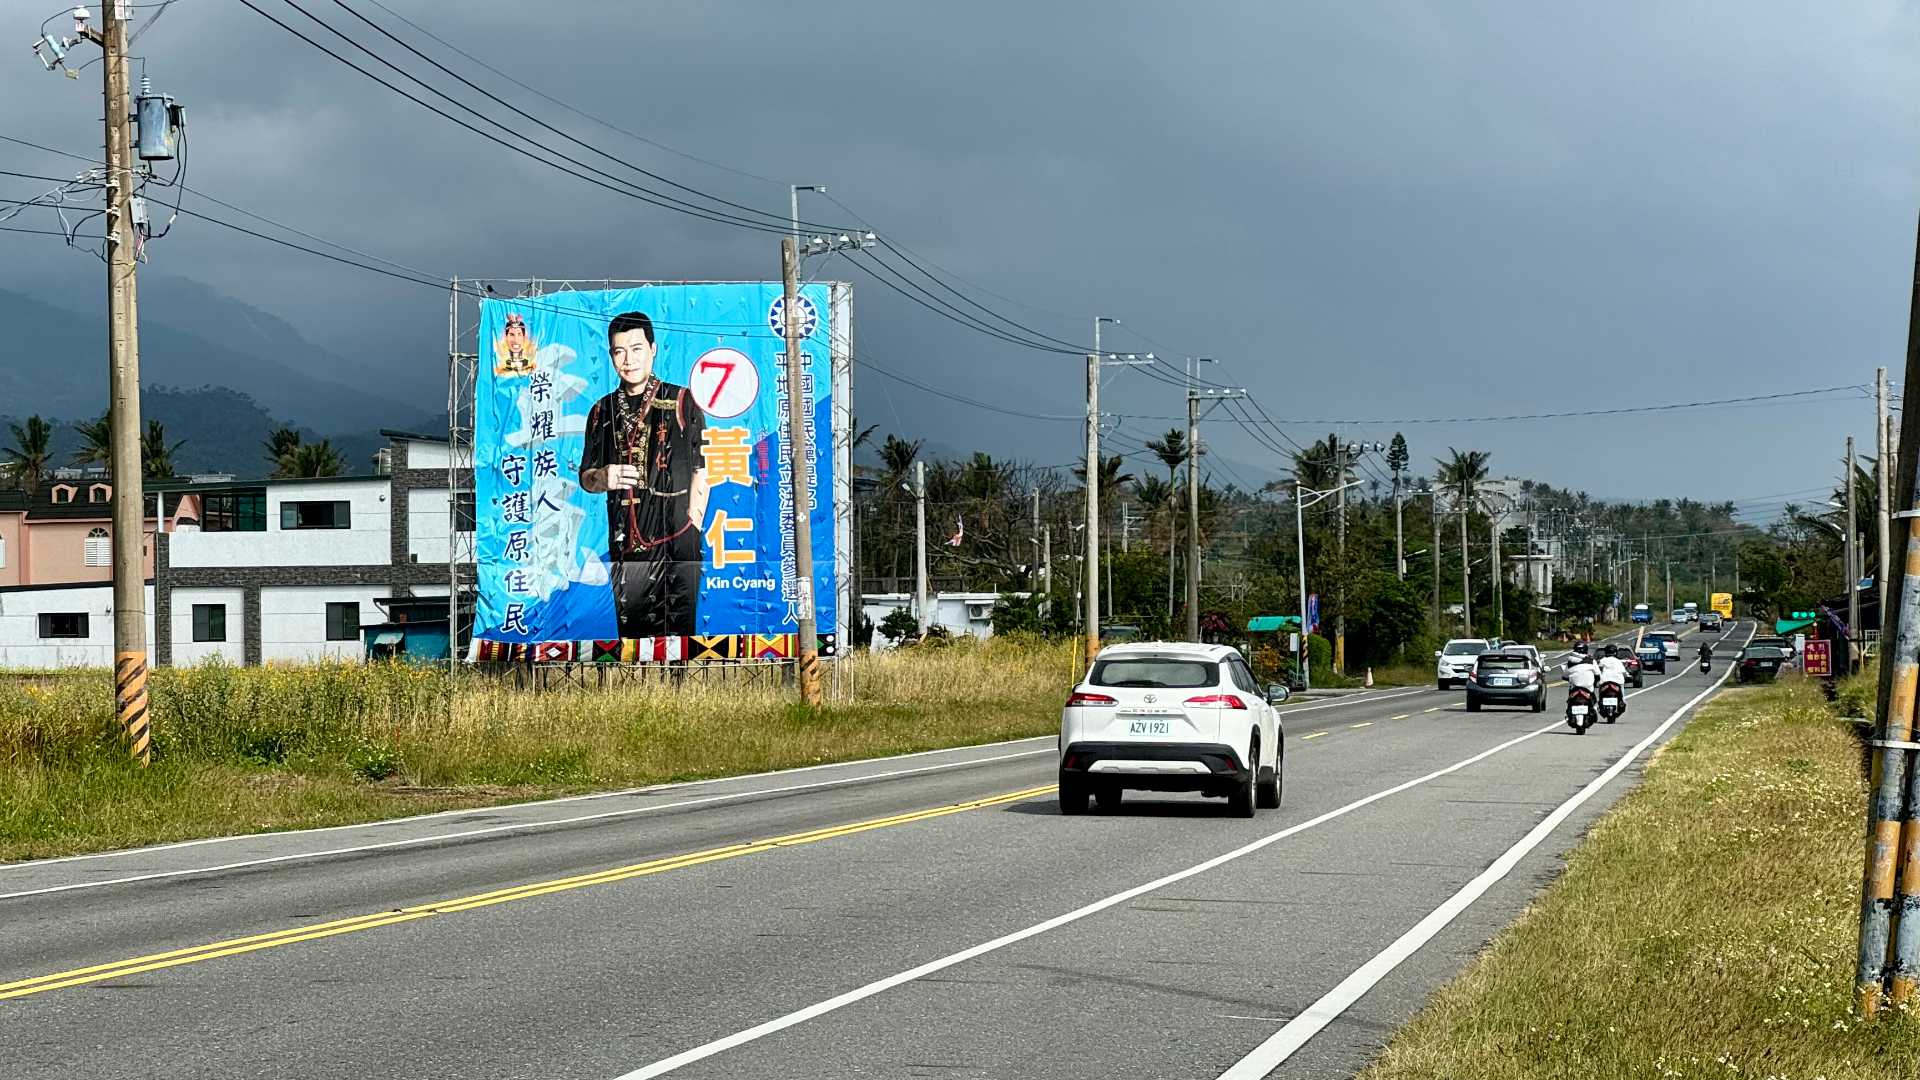 A large election billboard next to a four-lane road in the countryside.